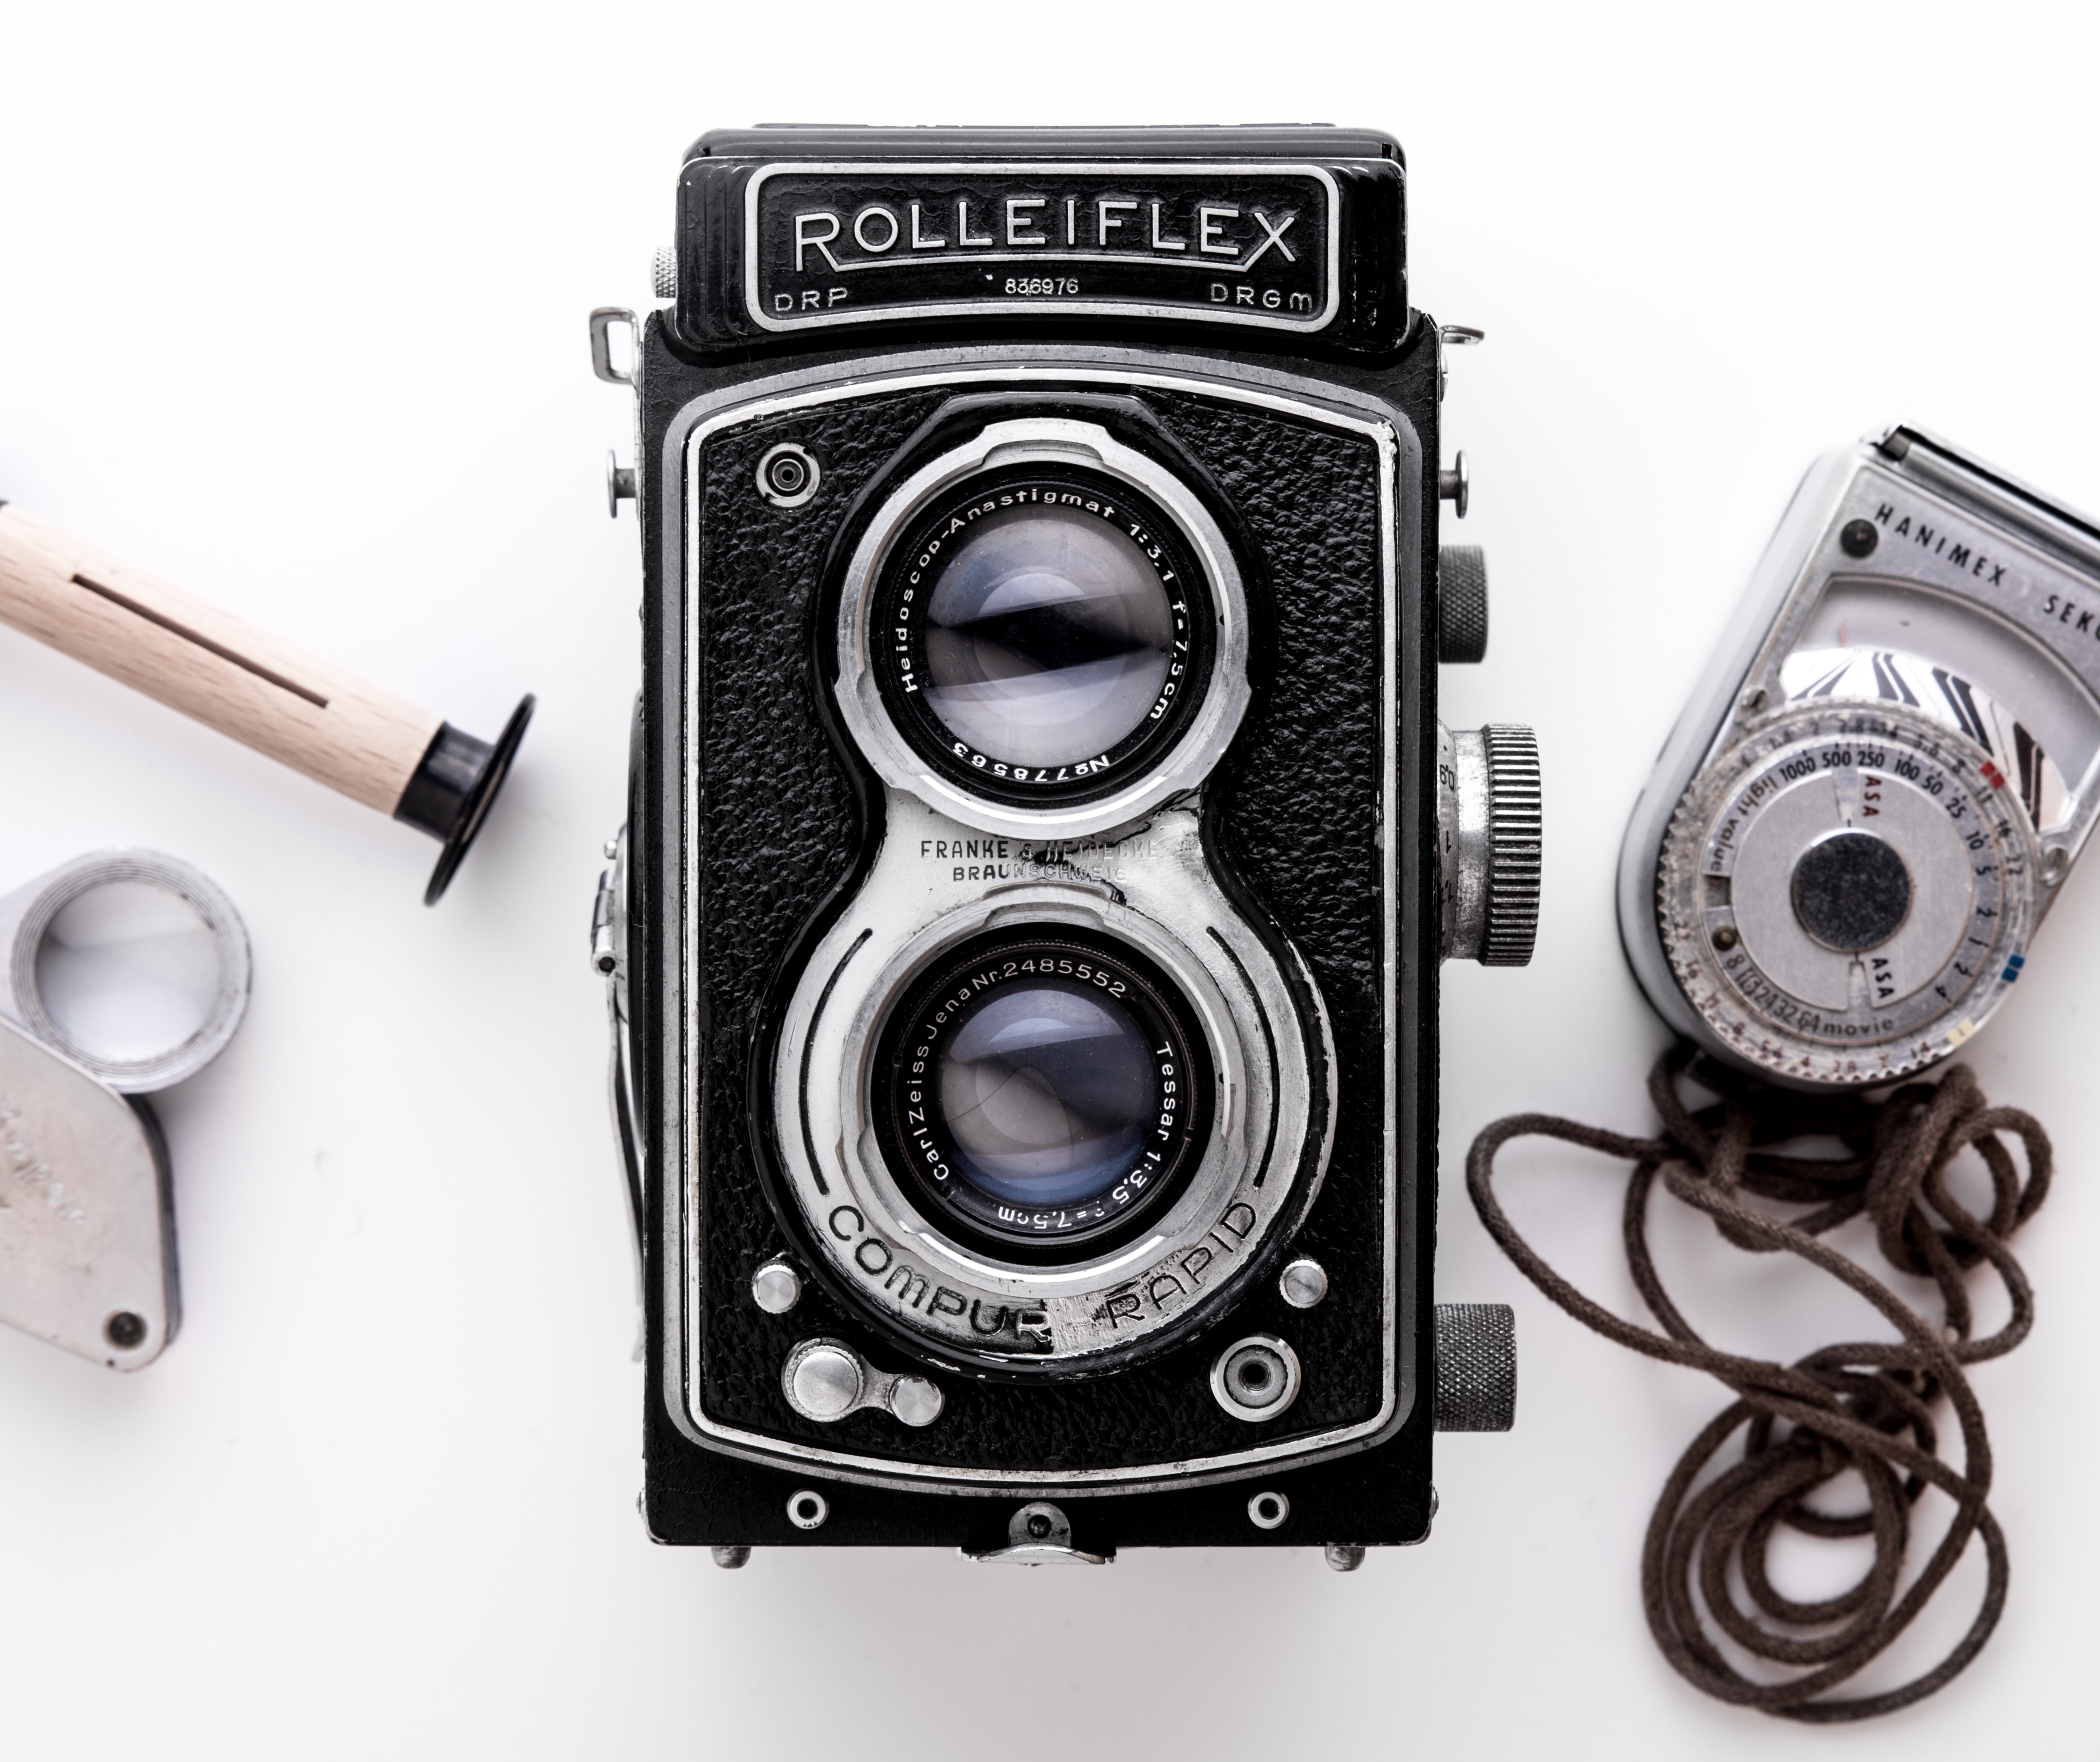 Black Rolleiflex camera on a white surface